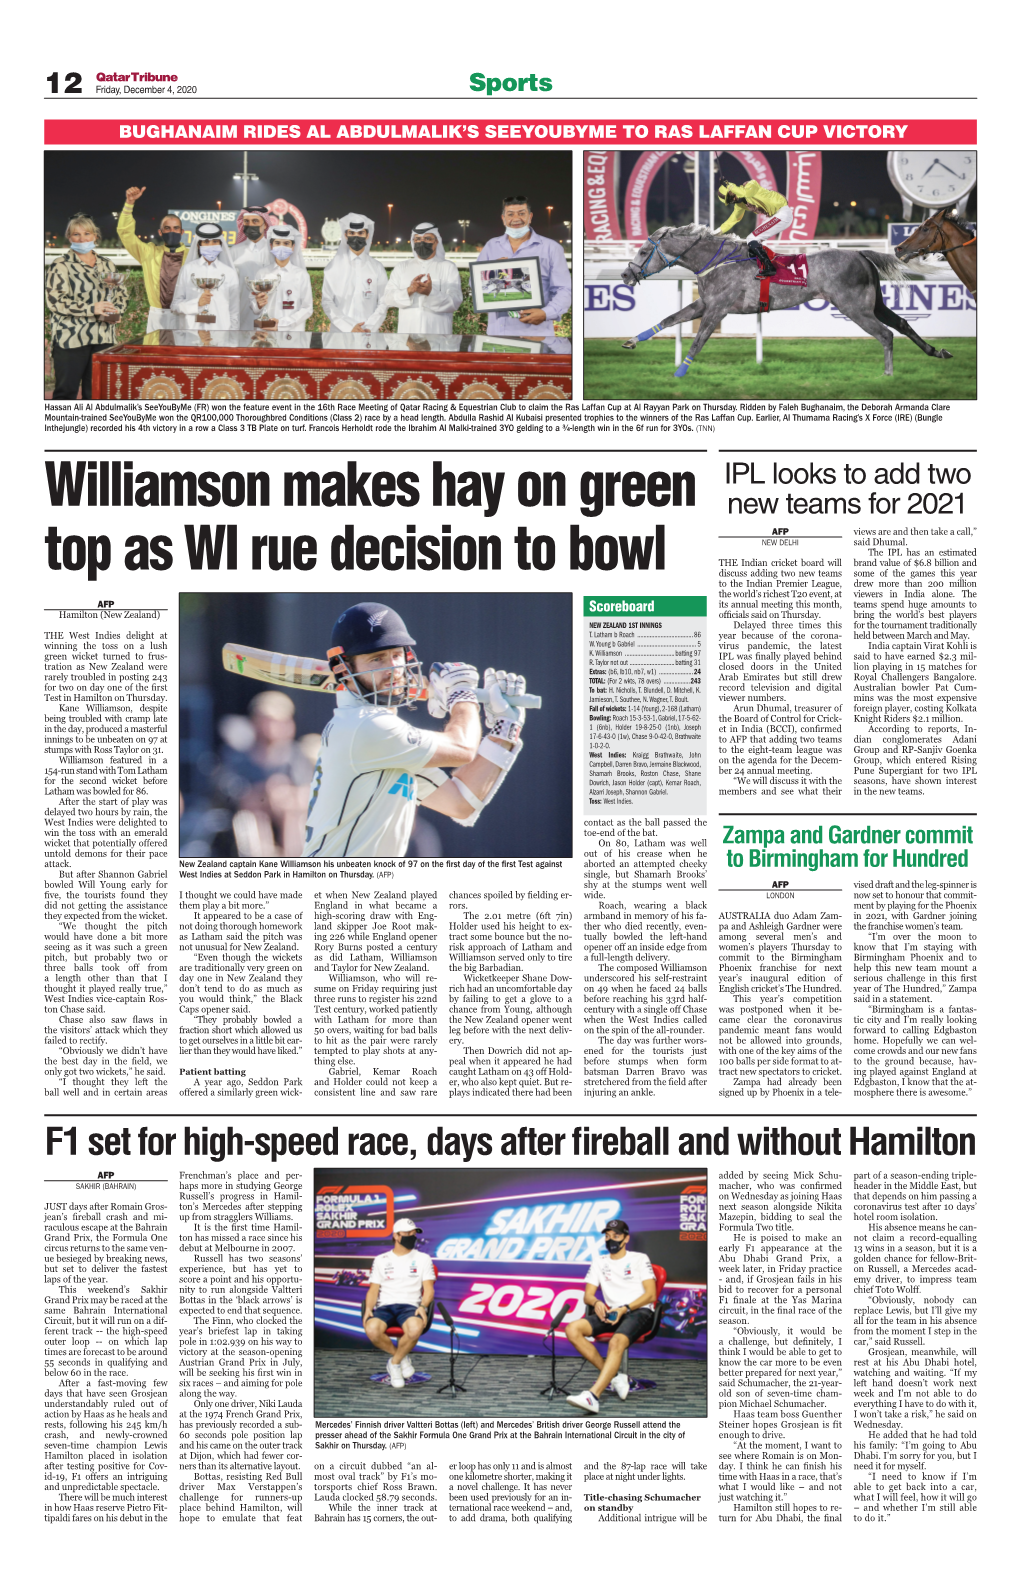 Williamson Makes Hay on Green Top As WI Rue Decision to Bowl